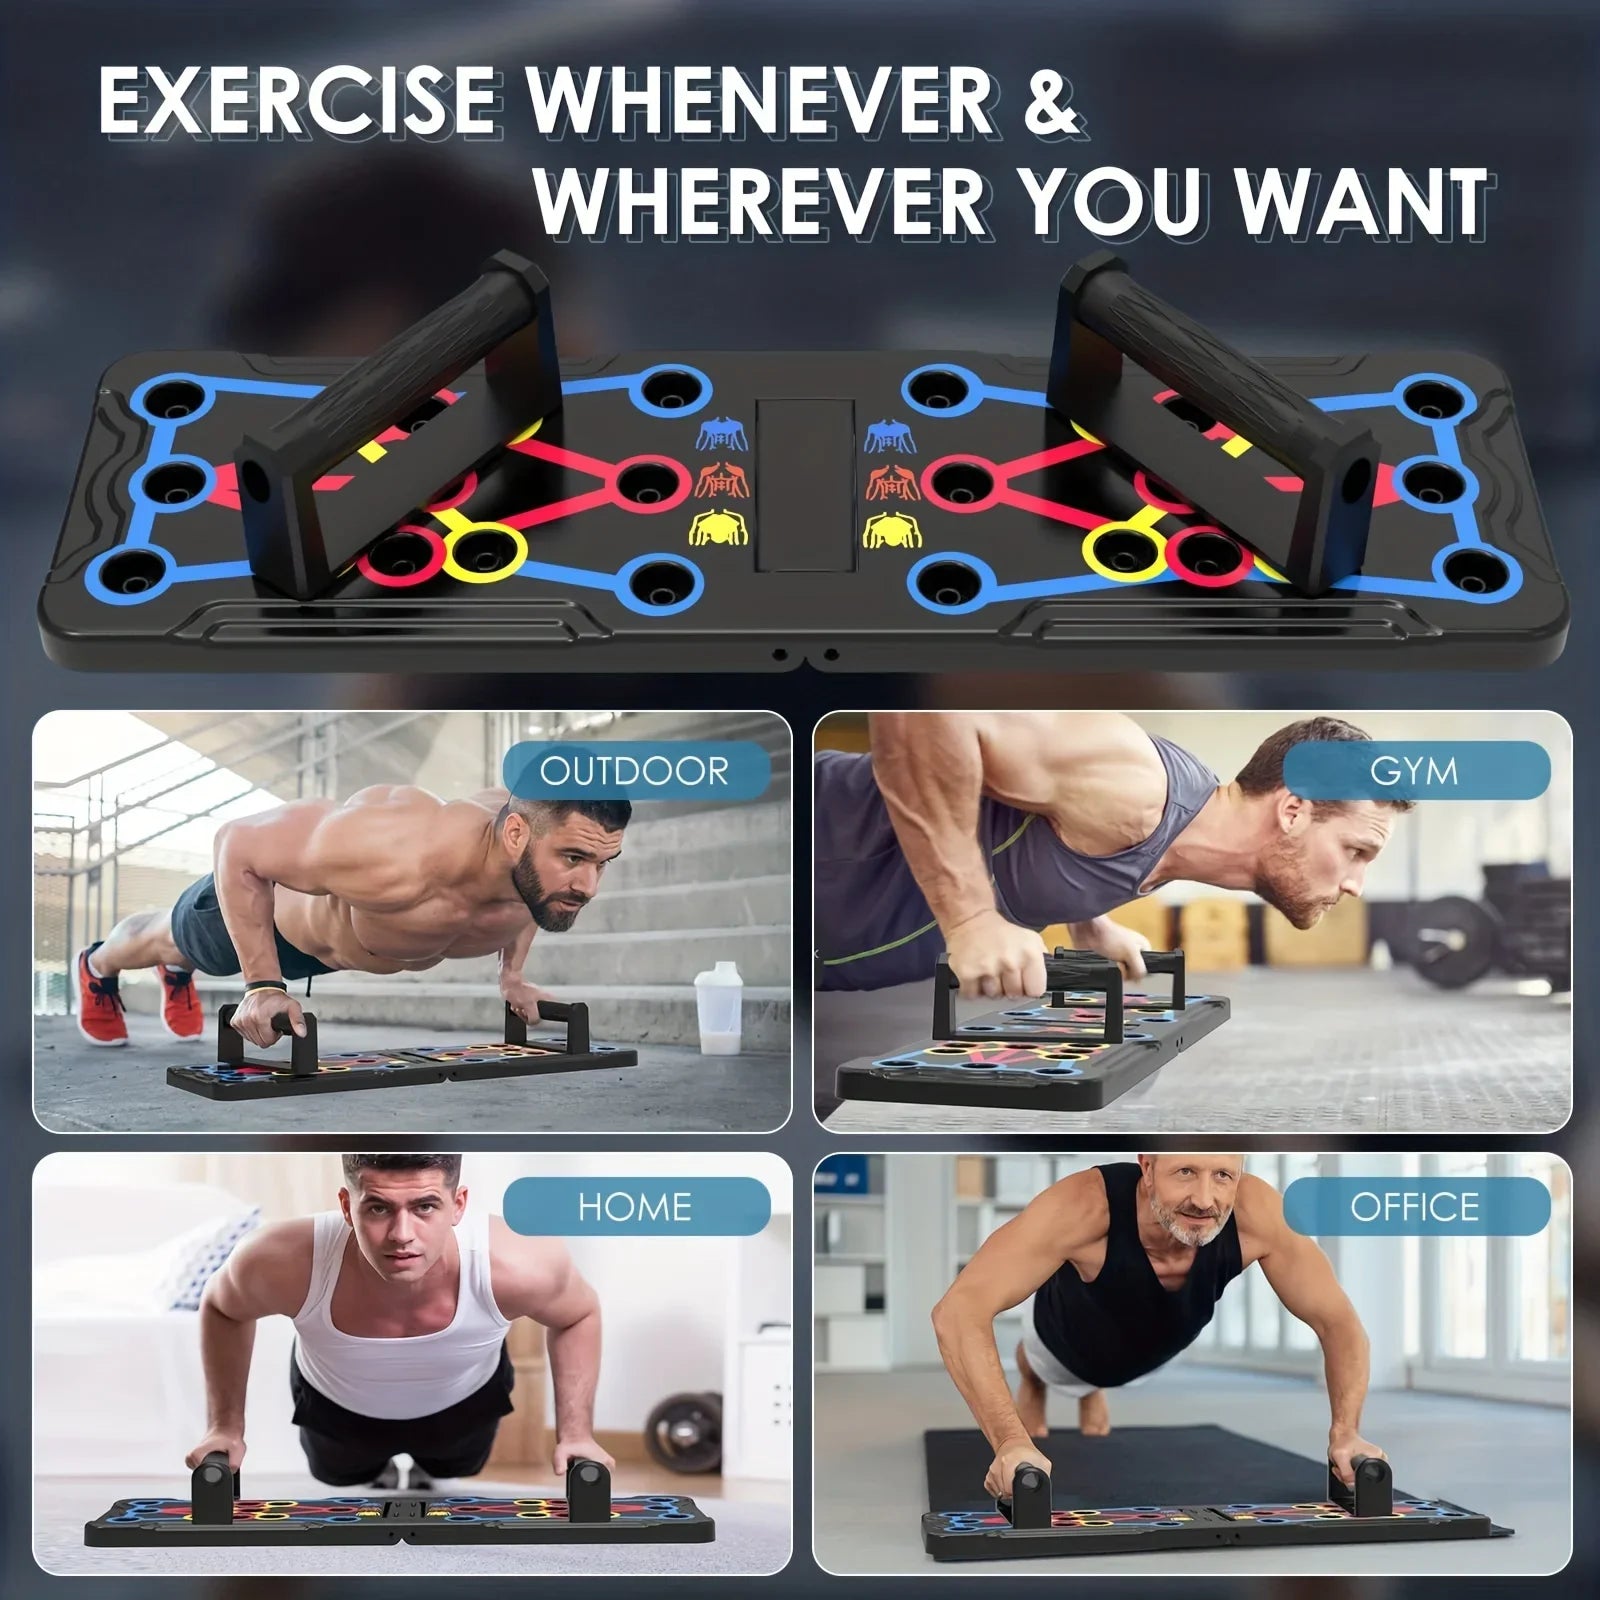 20-in-1 Push Up Board: Get Fit Tone Chest Muscles Foldable Multi-Functional Exercise Equipment Fitness Sports Gym Workout Kit